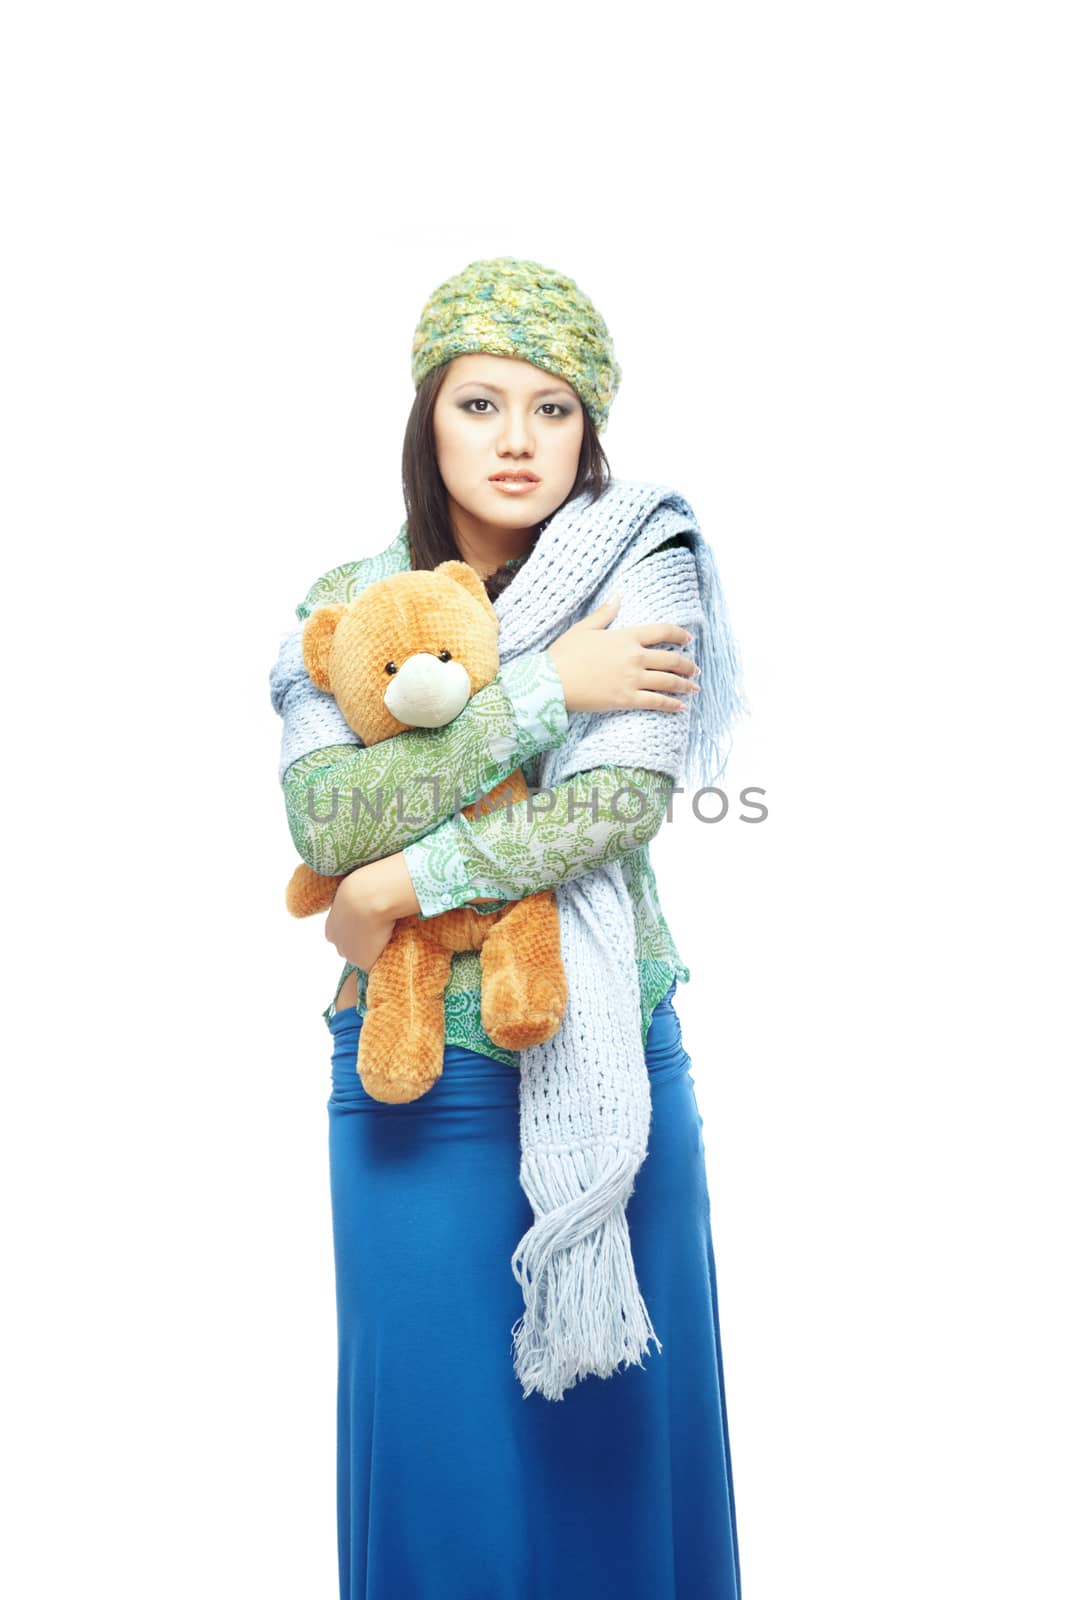 Sad young lady holding the toy on a white background